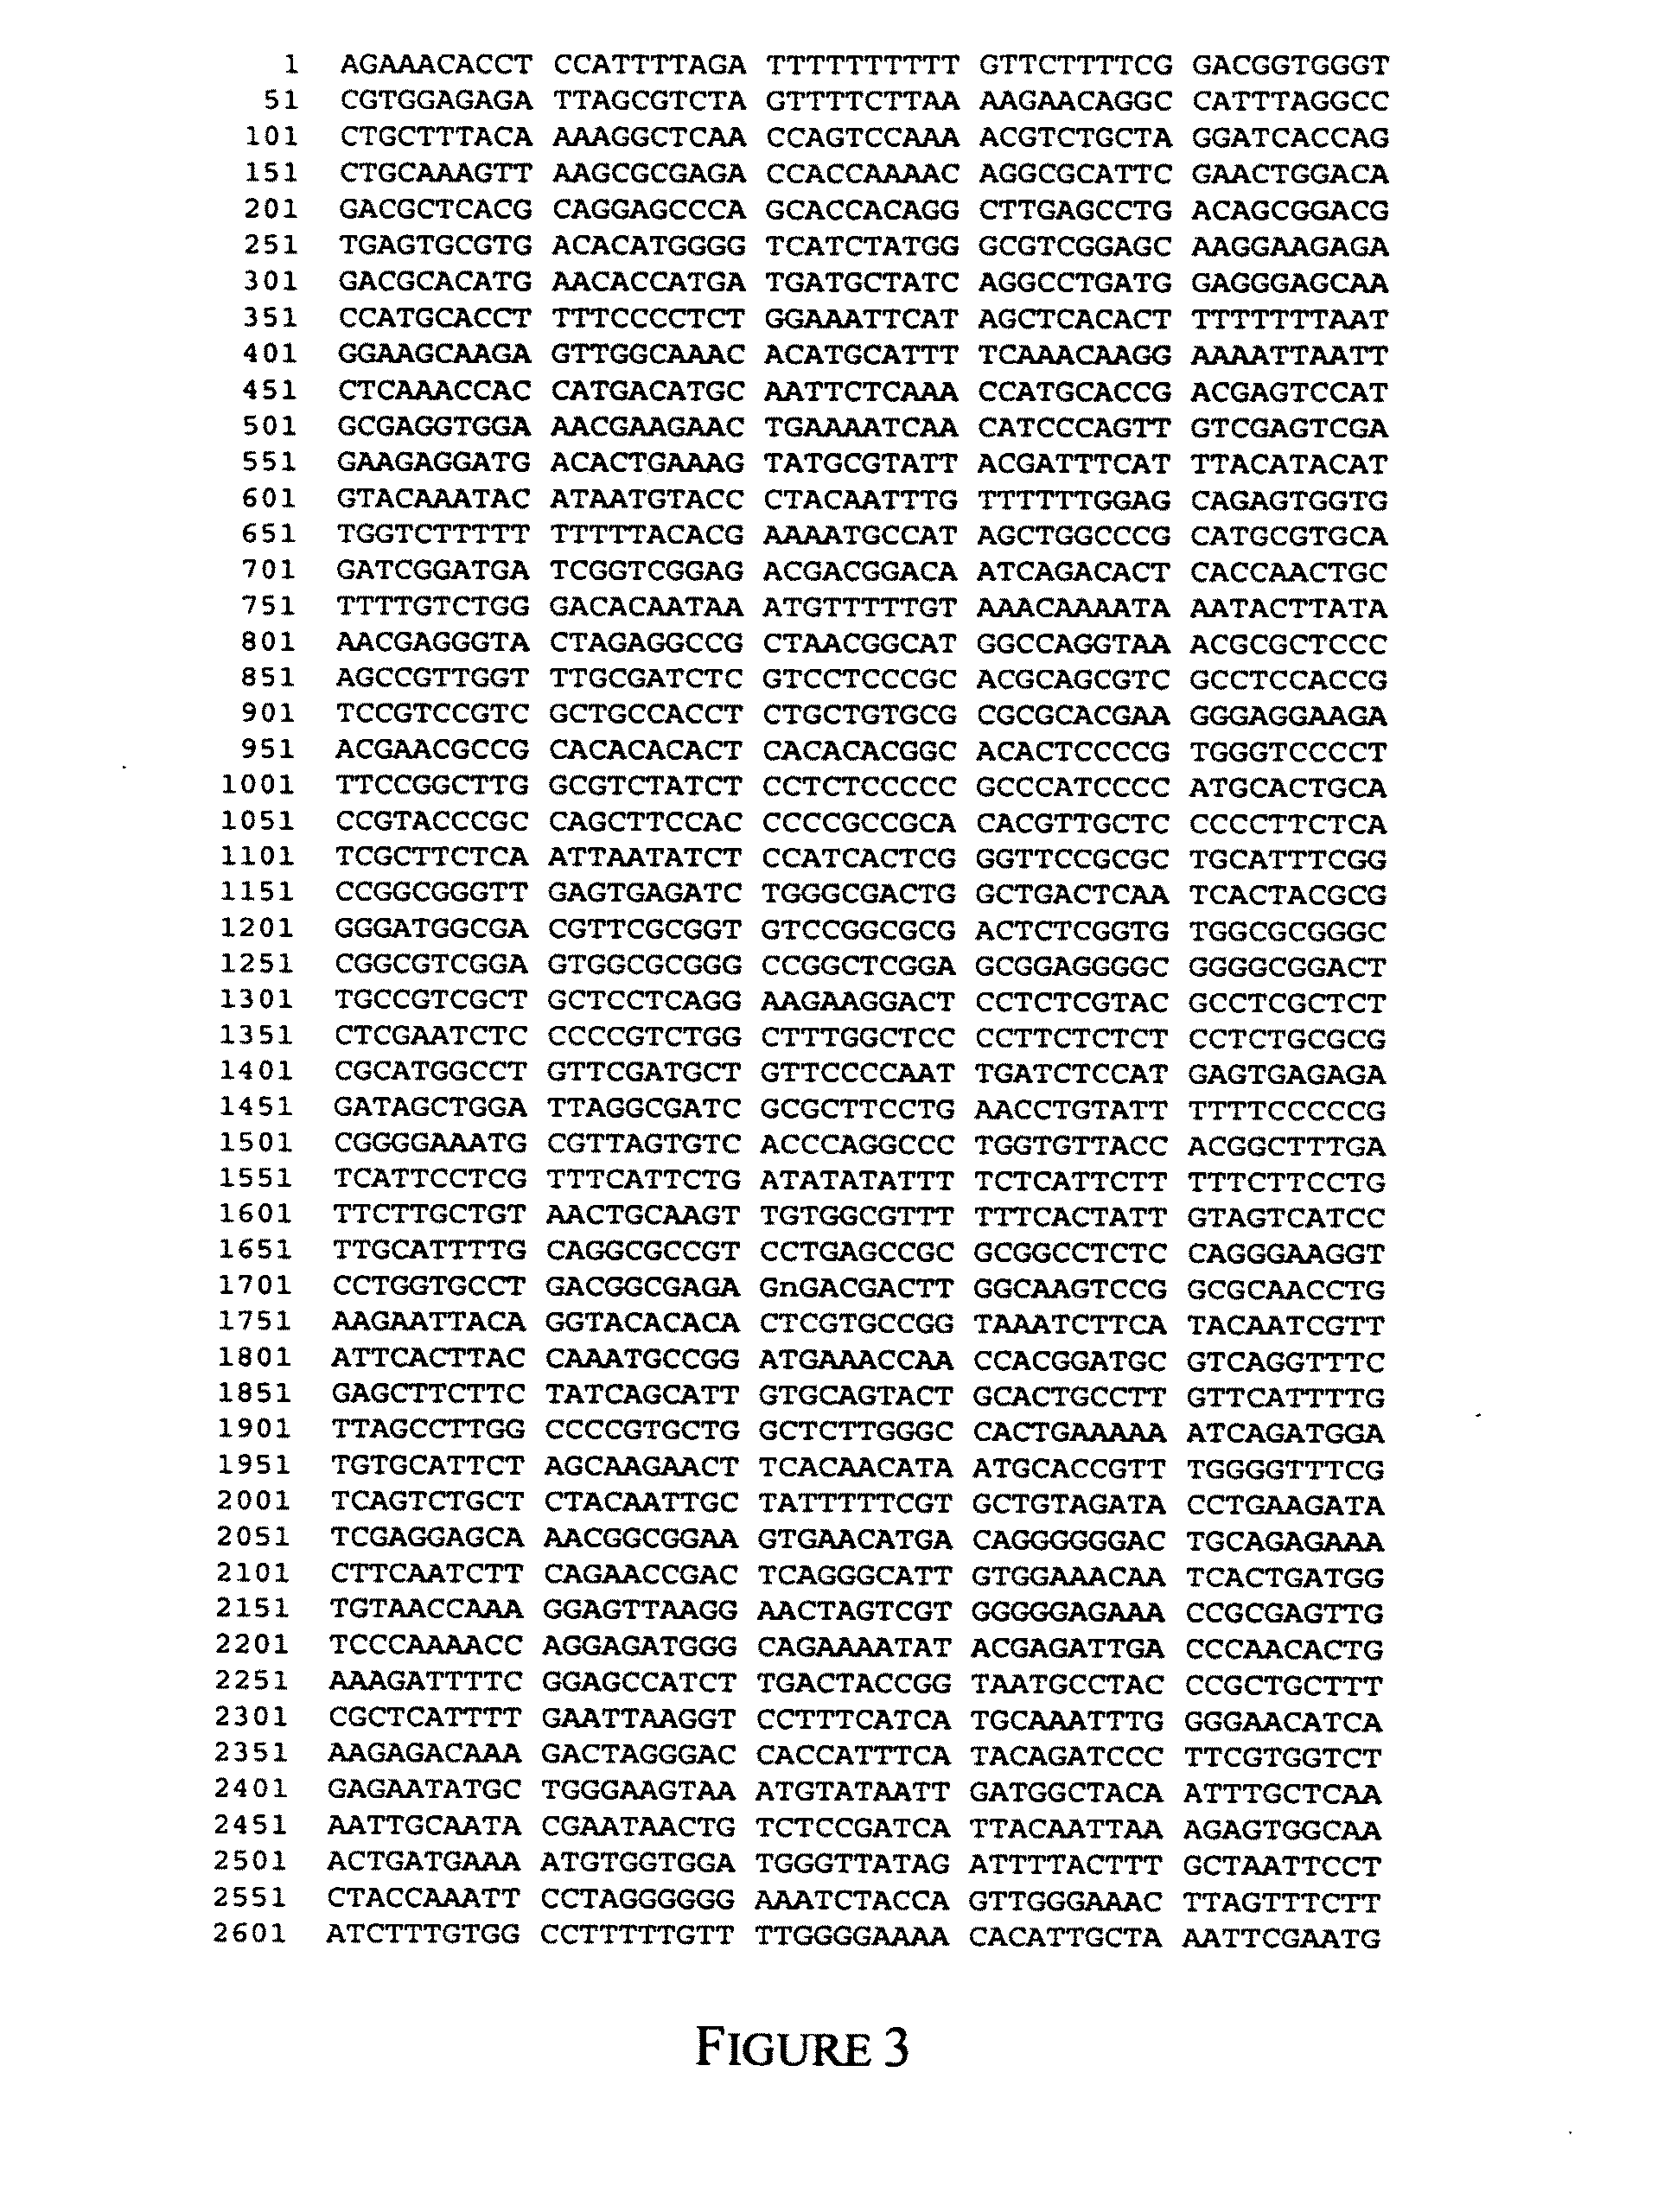 Barley with altered branching enzyme activity and starch and starch containing products with an increased amylose content